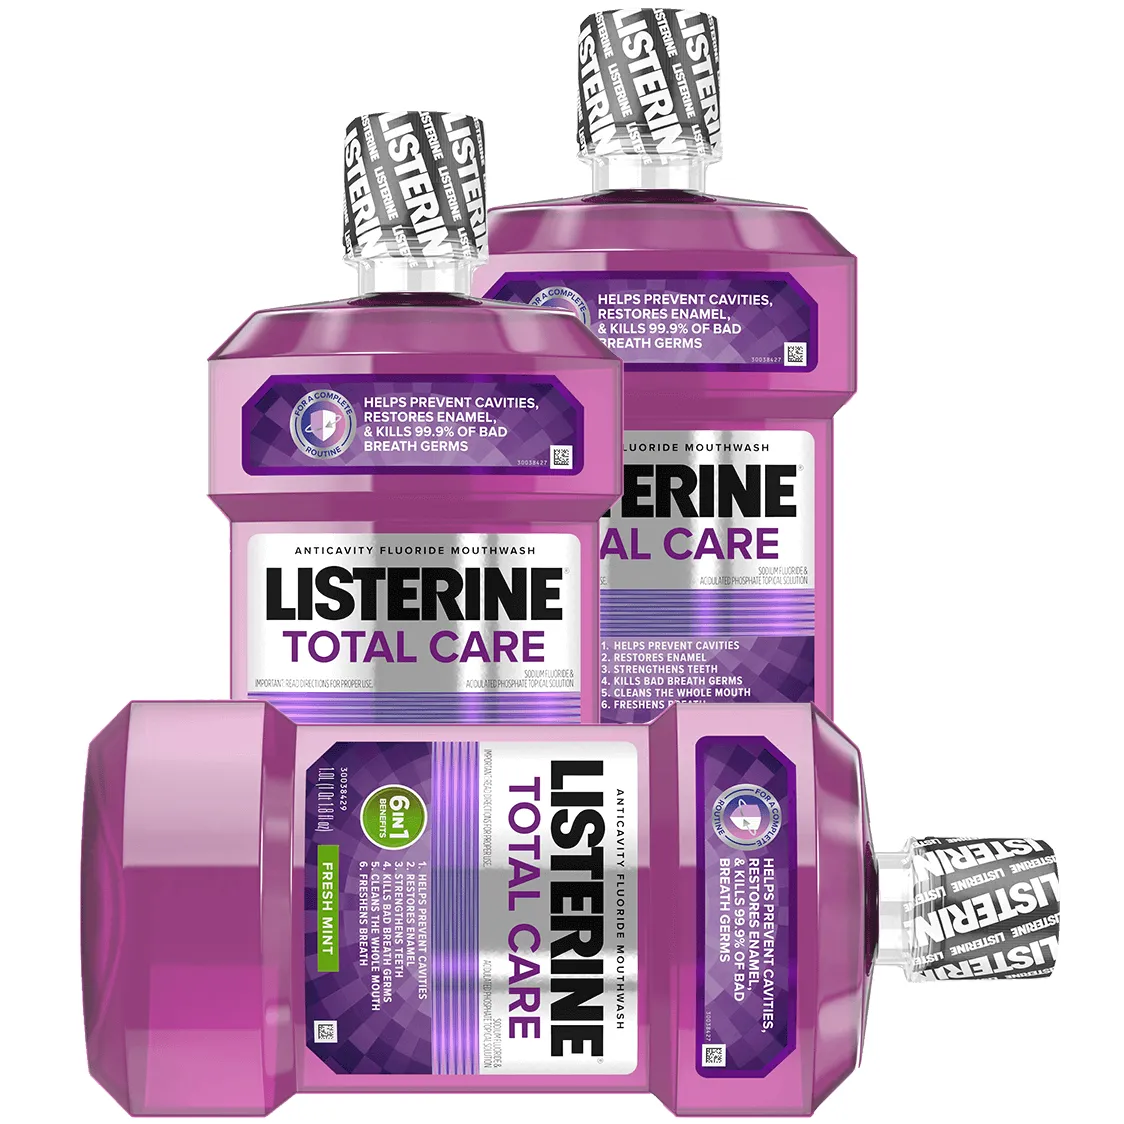 Free Listerine Total Care Mouthwash